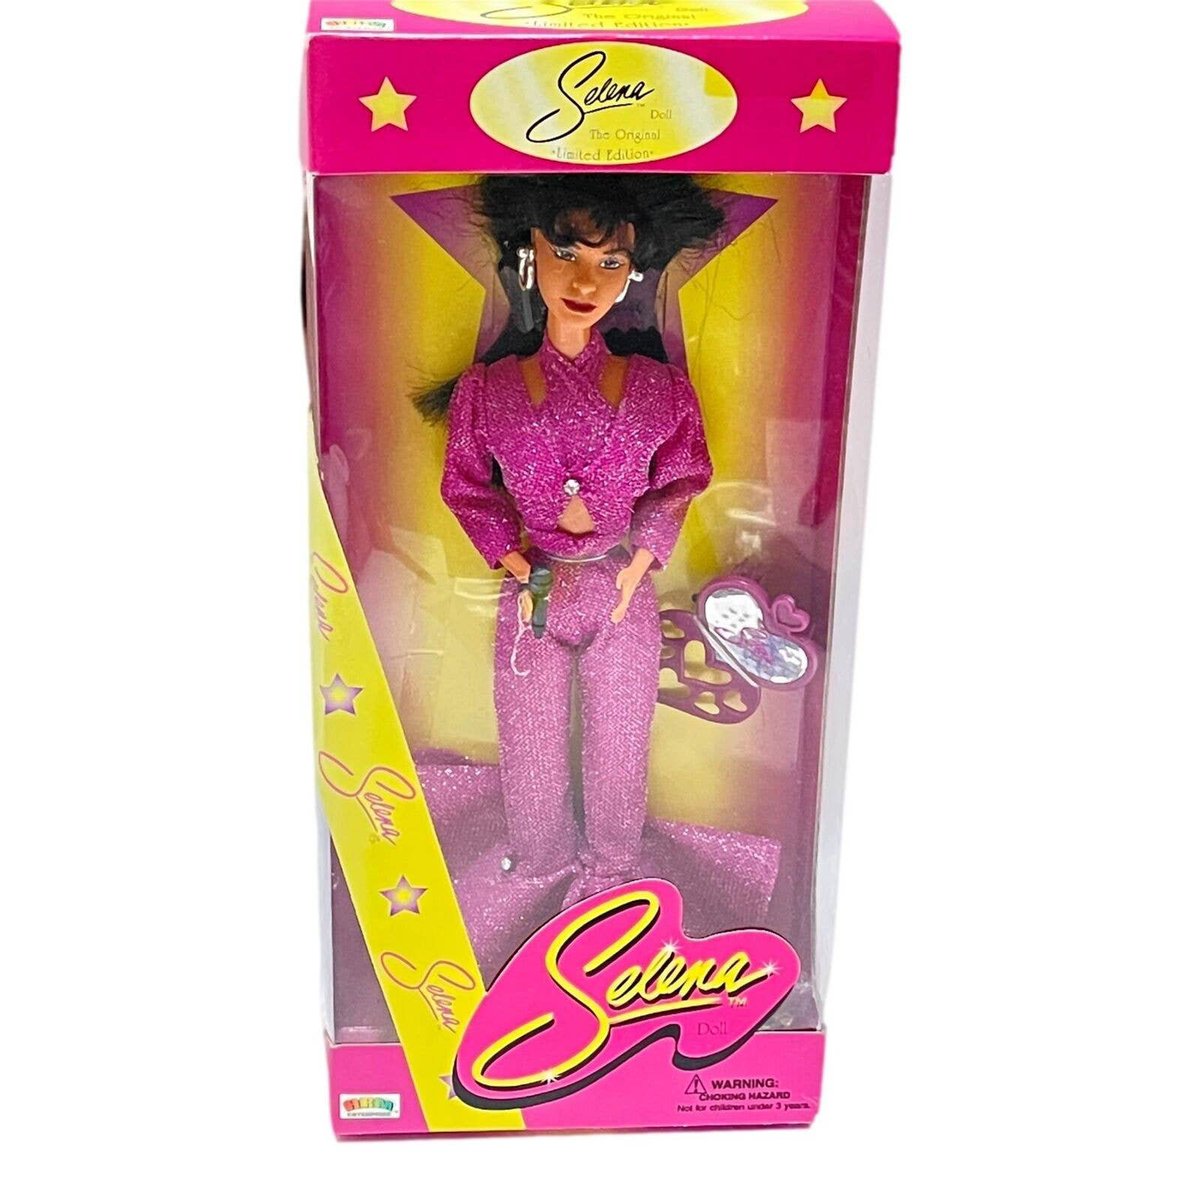 Excited to share this item from my #etsy shop: Selena Quintanilla Fashion Doll Houston 1996 ARM Limited Edition New Barbie #selena #fashiondoll #limtededition #selenabarbie #selenaquintanilla #selenabarbiedoll https://t.co/s7himkrsAg https://t.co/2bROantTll